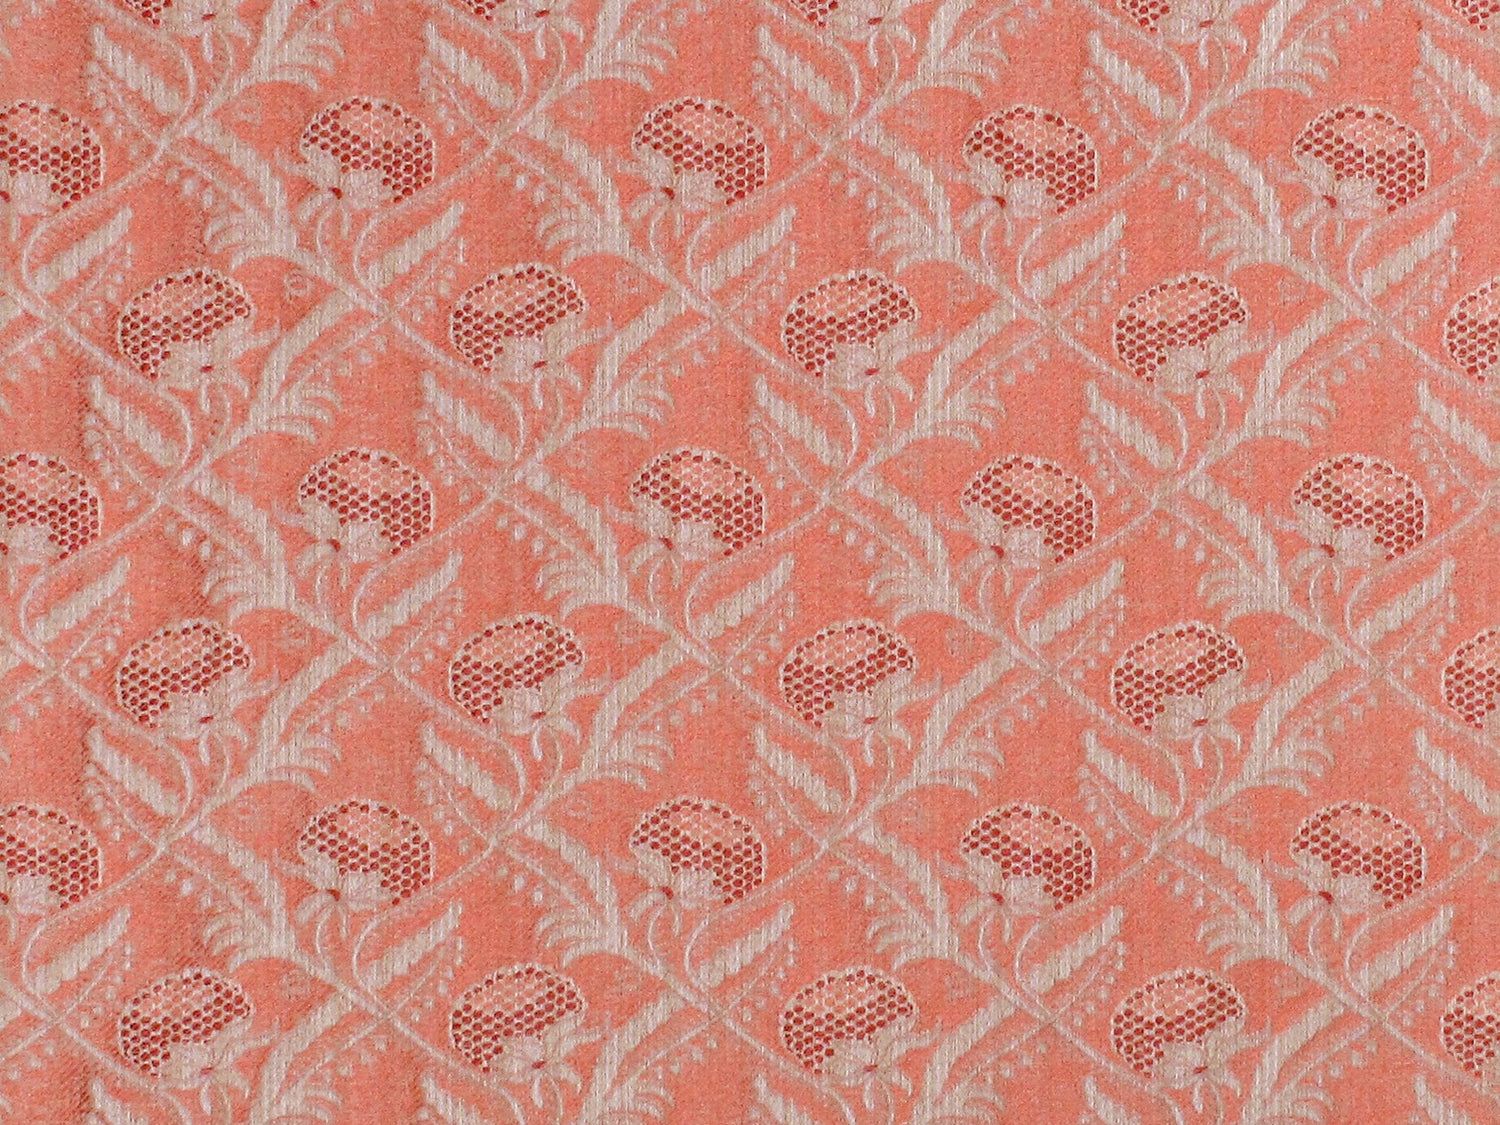 Boutonniere fabric in coral color - pattern number A7 000214PG - by Scalamandre in the Old World Weavers collection